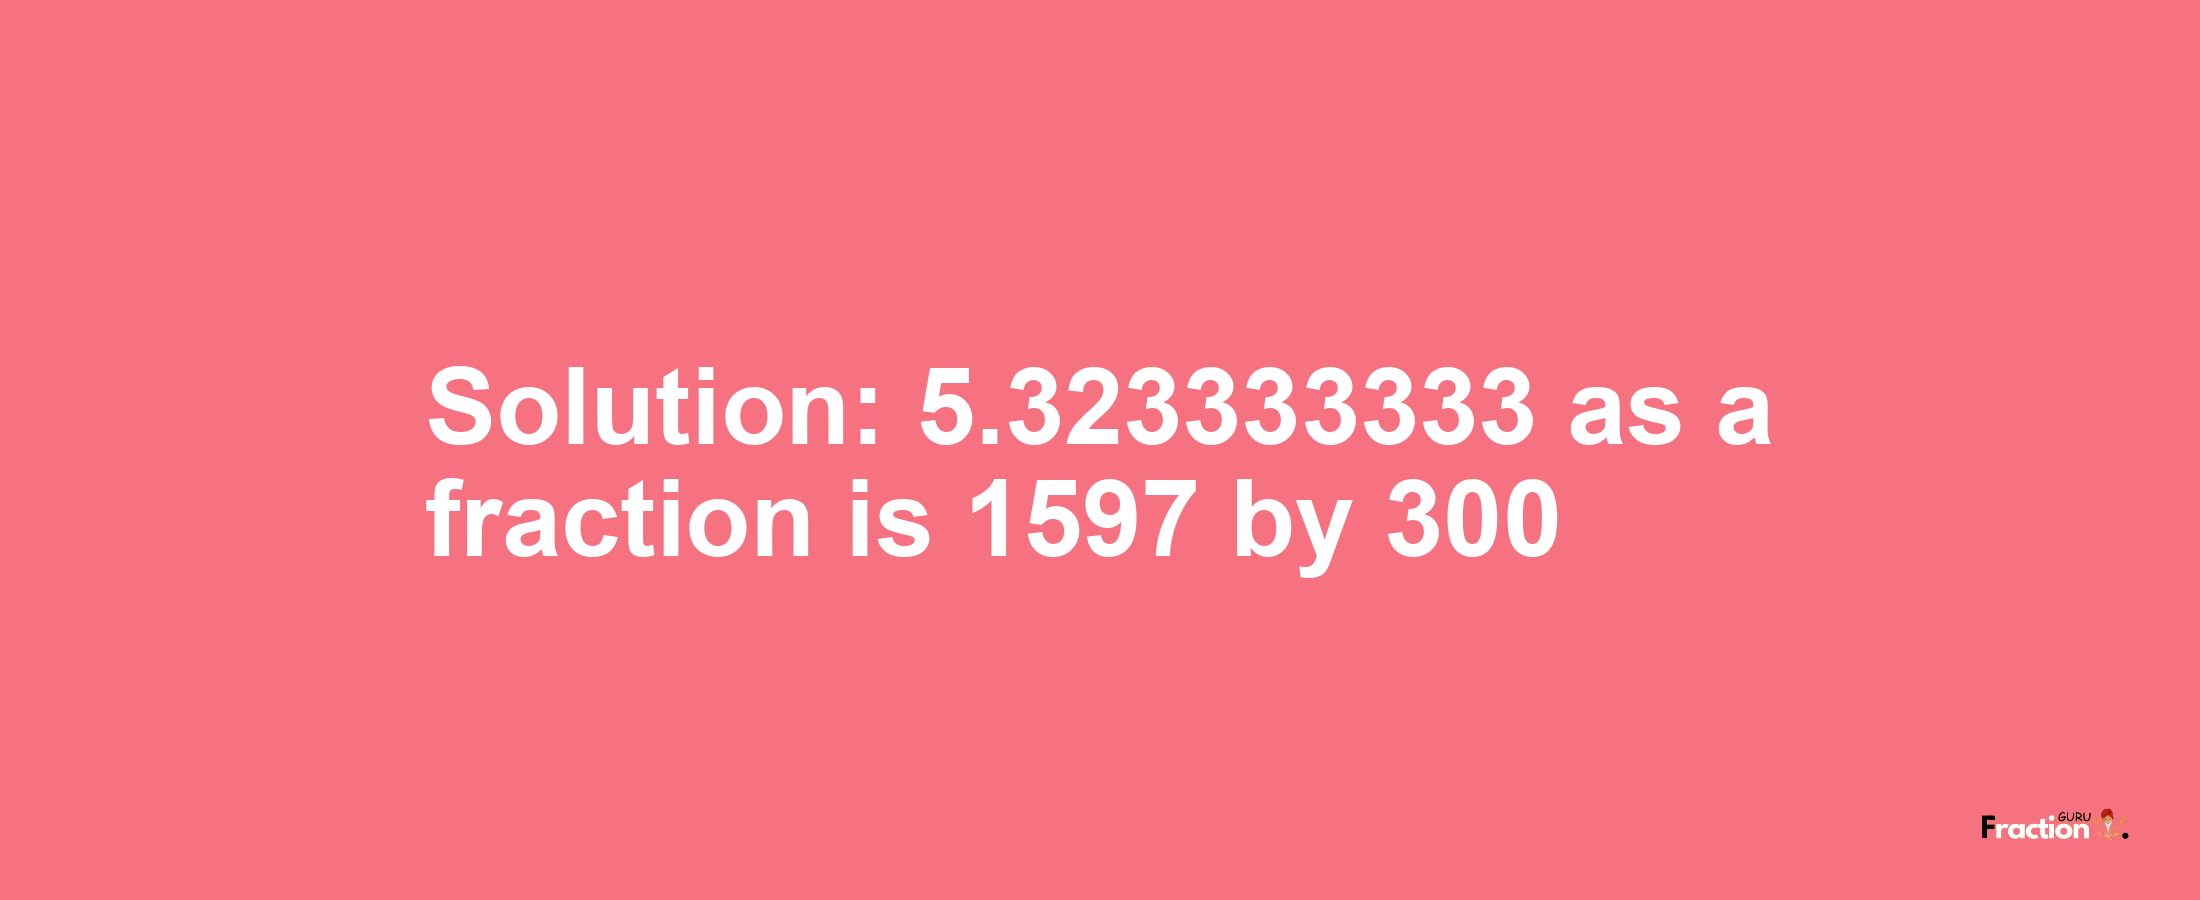 Solution:5.323333333 as a fraction is 1597/300